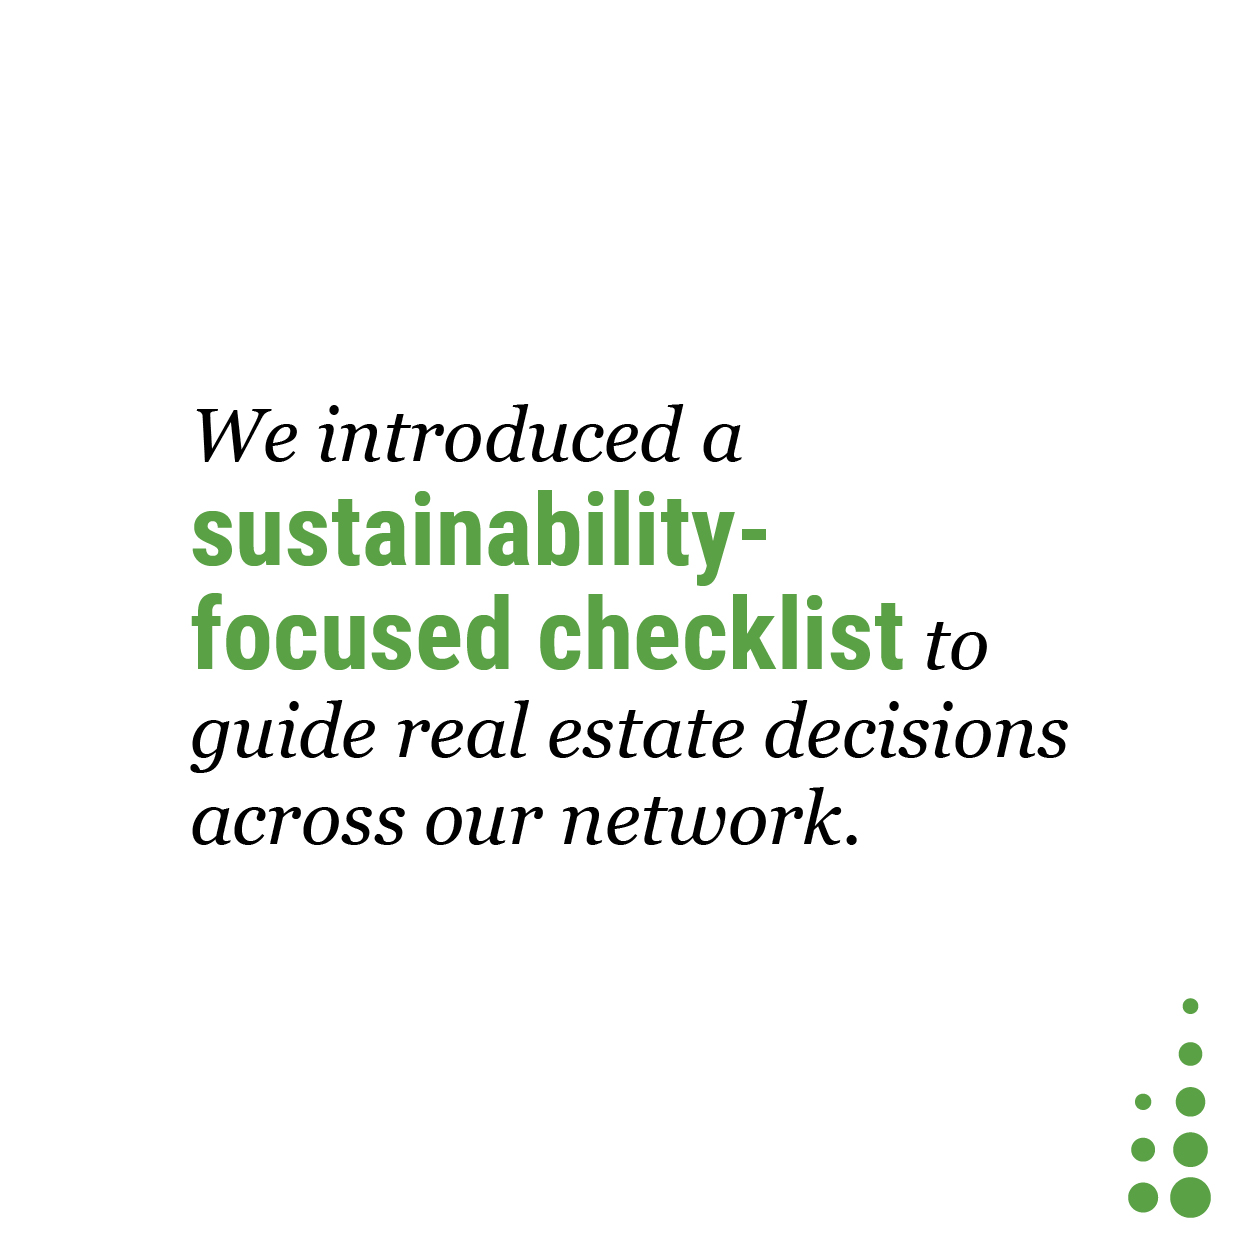 We introduced a sustainability-focused checklist to guide real estate decisions across our network.